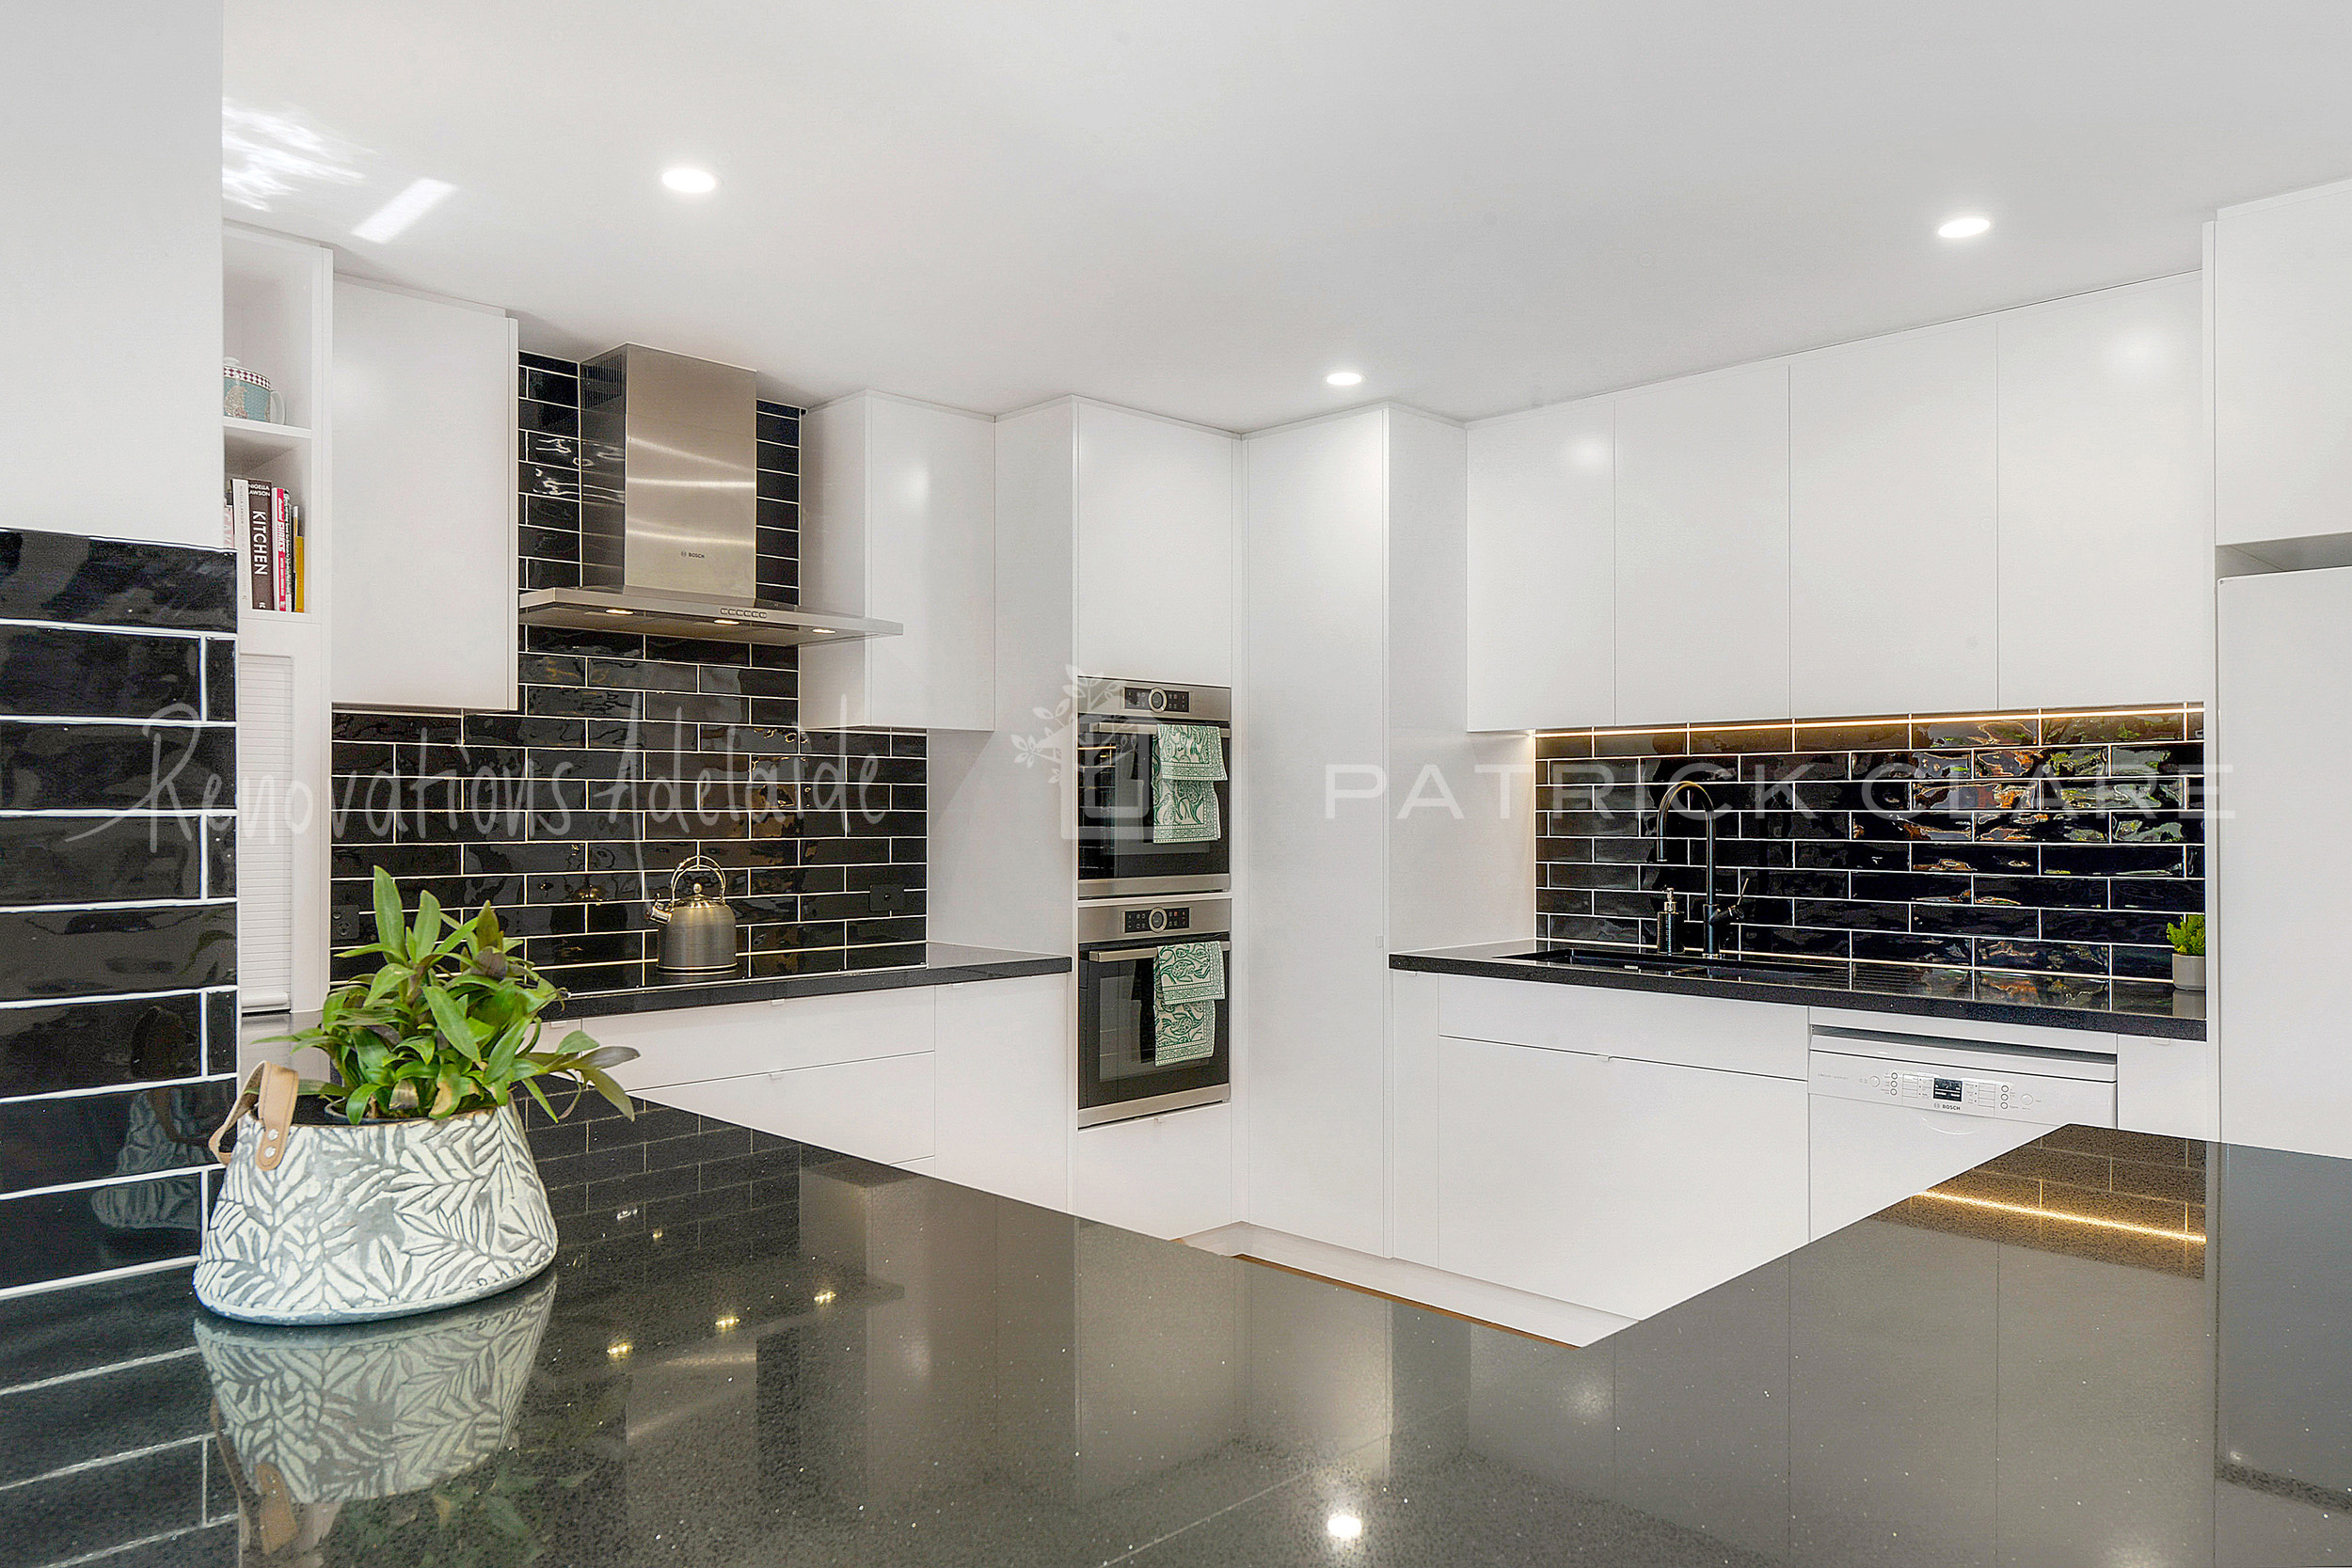 Kitchen Renovations Adelaide Cost